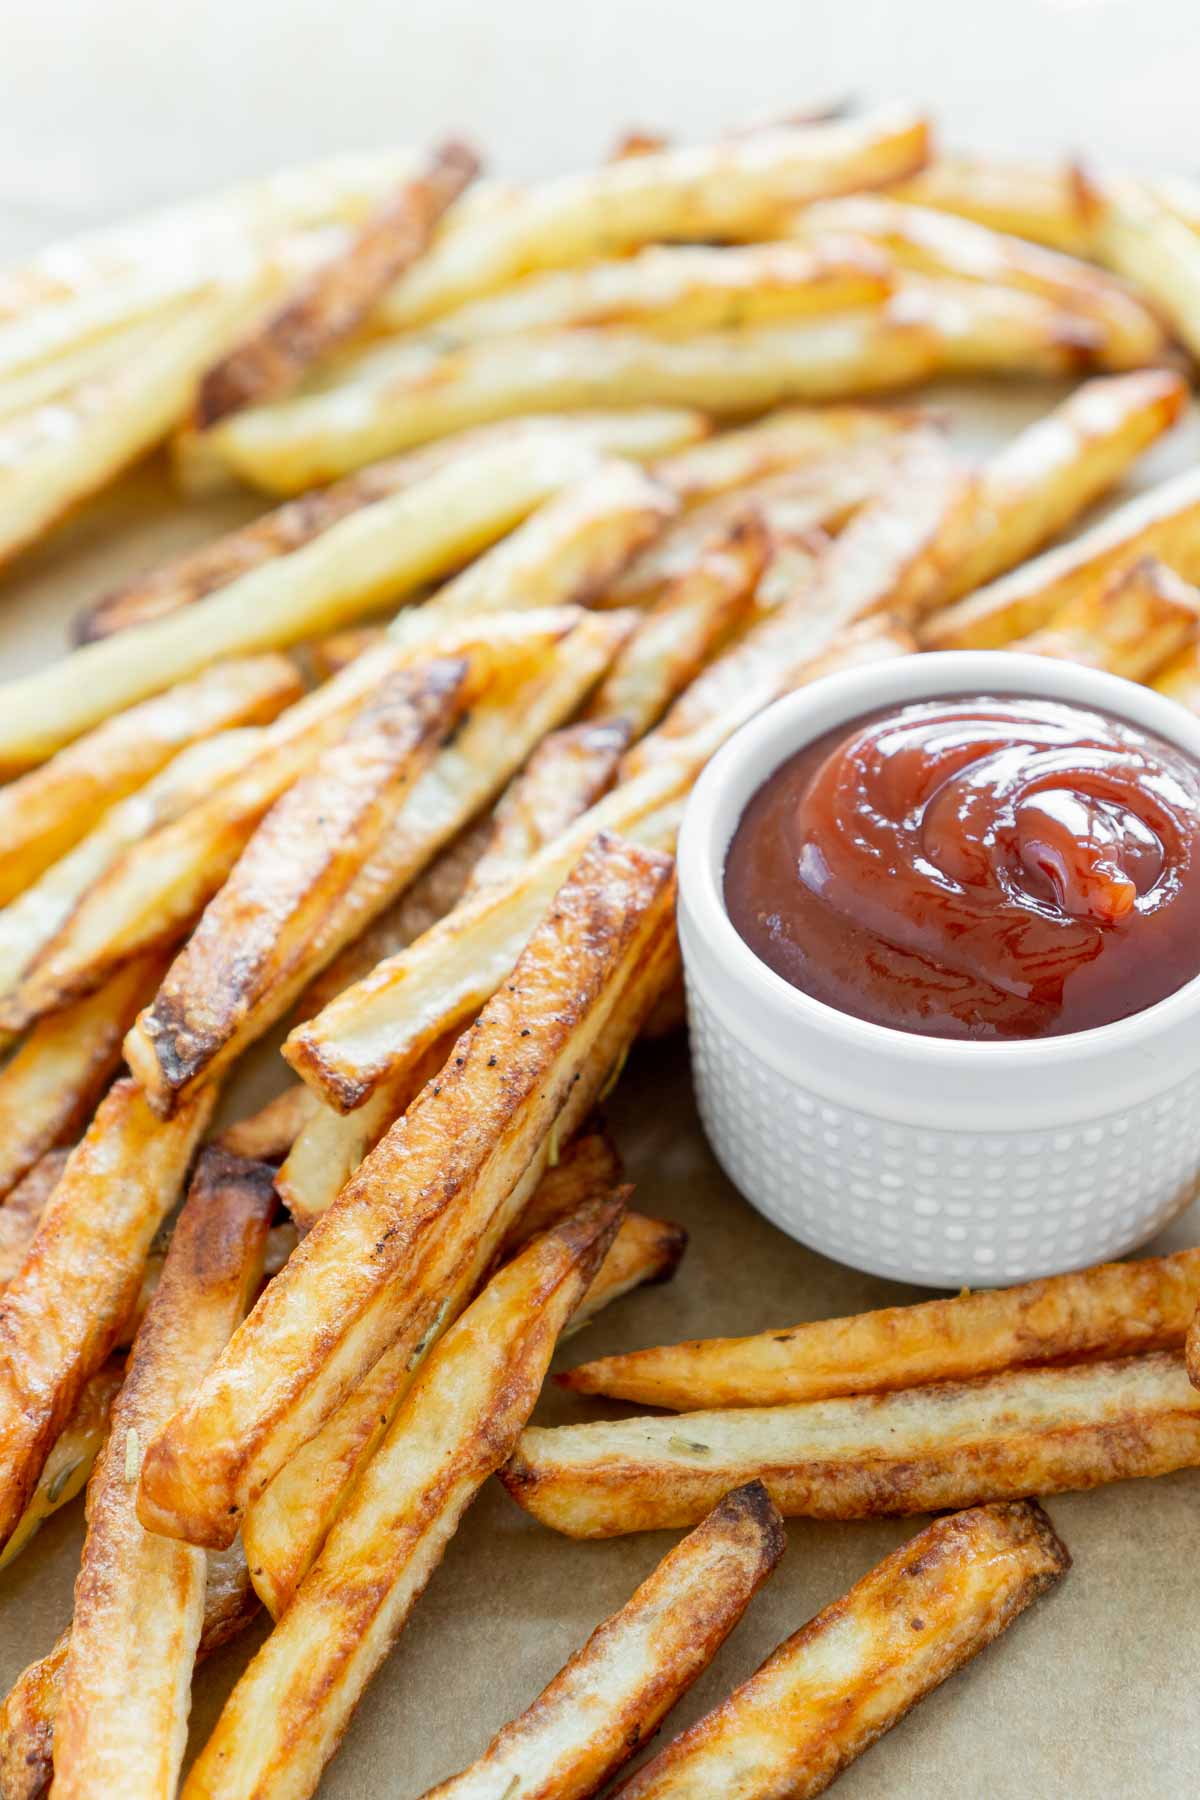 A pile of air fryer fries with a small white cup of ketchup